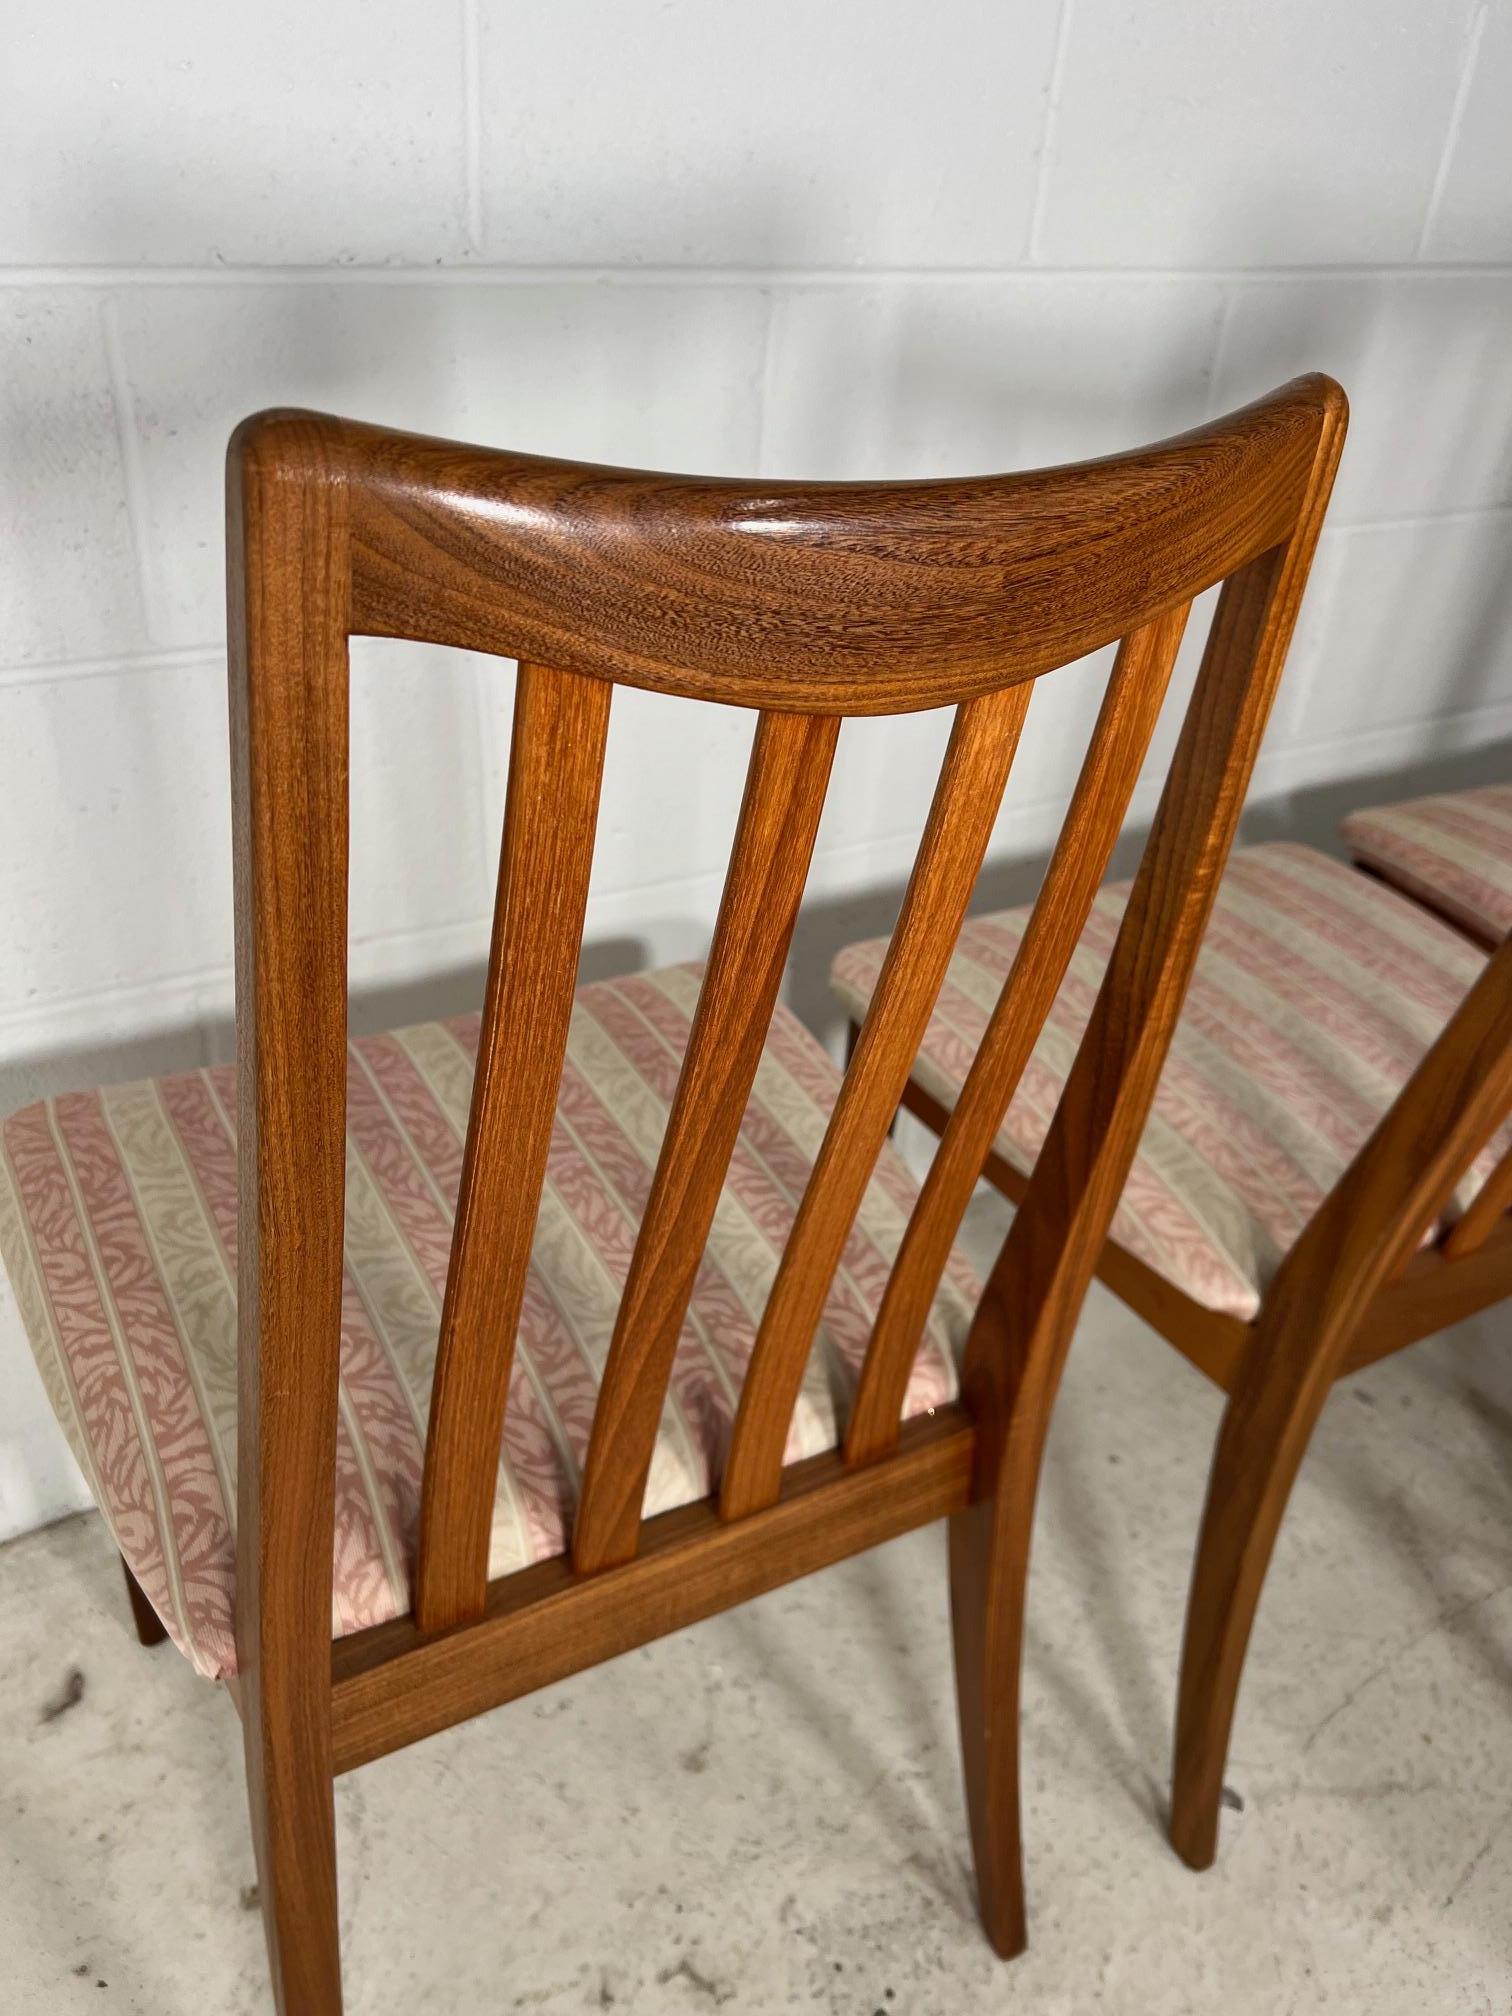 Set Of 6 Mid Century Modern Teak Chairs By G Plan Slat Back  2 With Arms 1